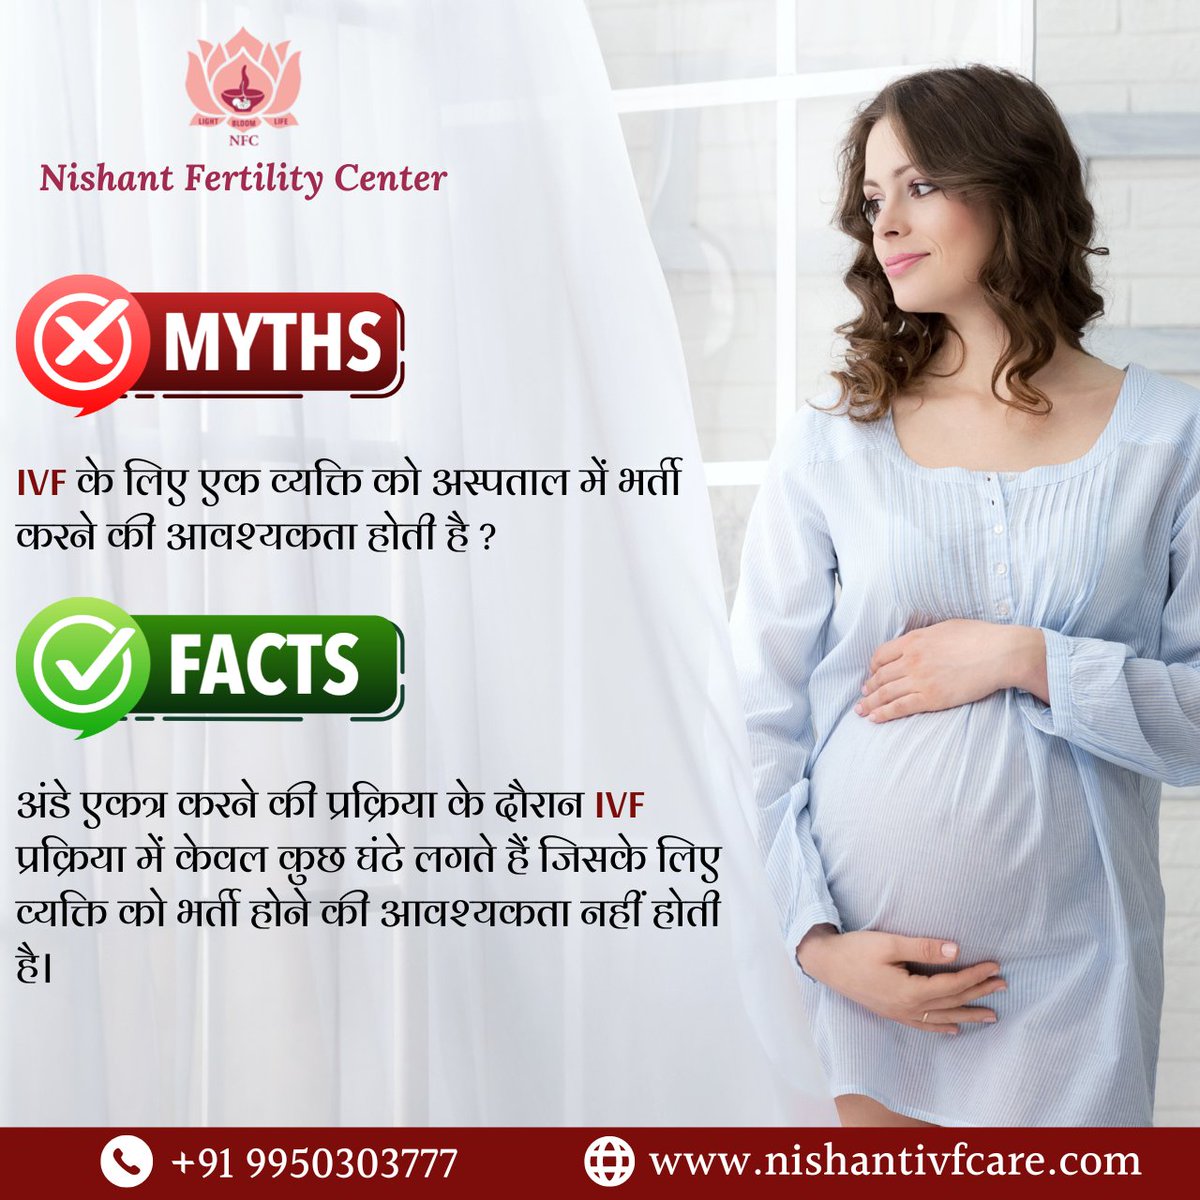 Ready to burst those fertility myths? Join us at Nishant Fertility Center as we debunk common misconceptions and empower you with the facts.

Contact our expert now: +91 9950303777

#MythandFact #IVF #FertilityAwareness #IVFMyth #IVFFact #FertilityFacts #Parenthood #Infertility